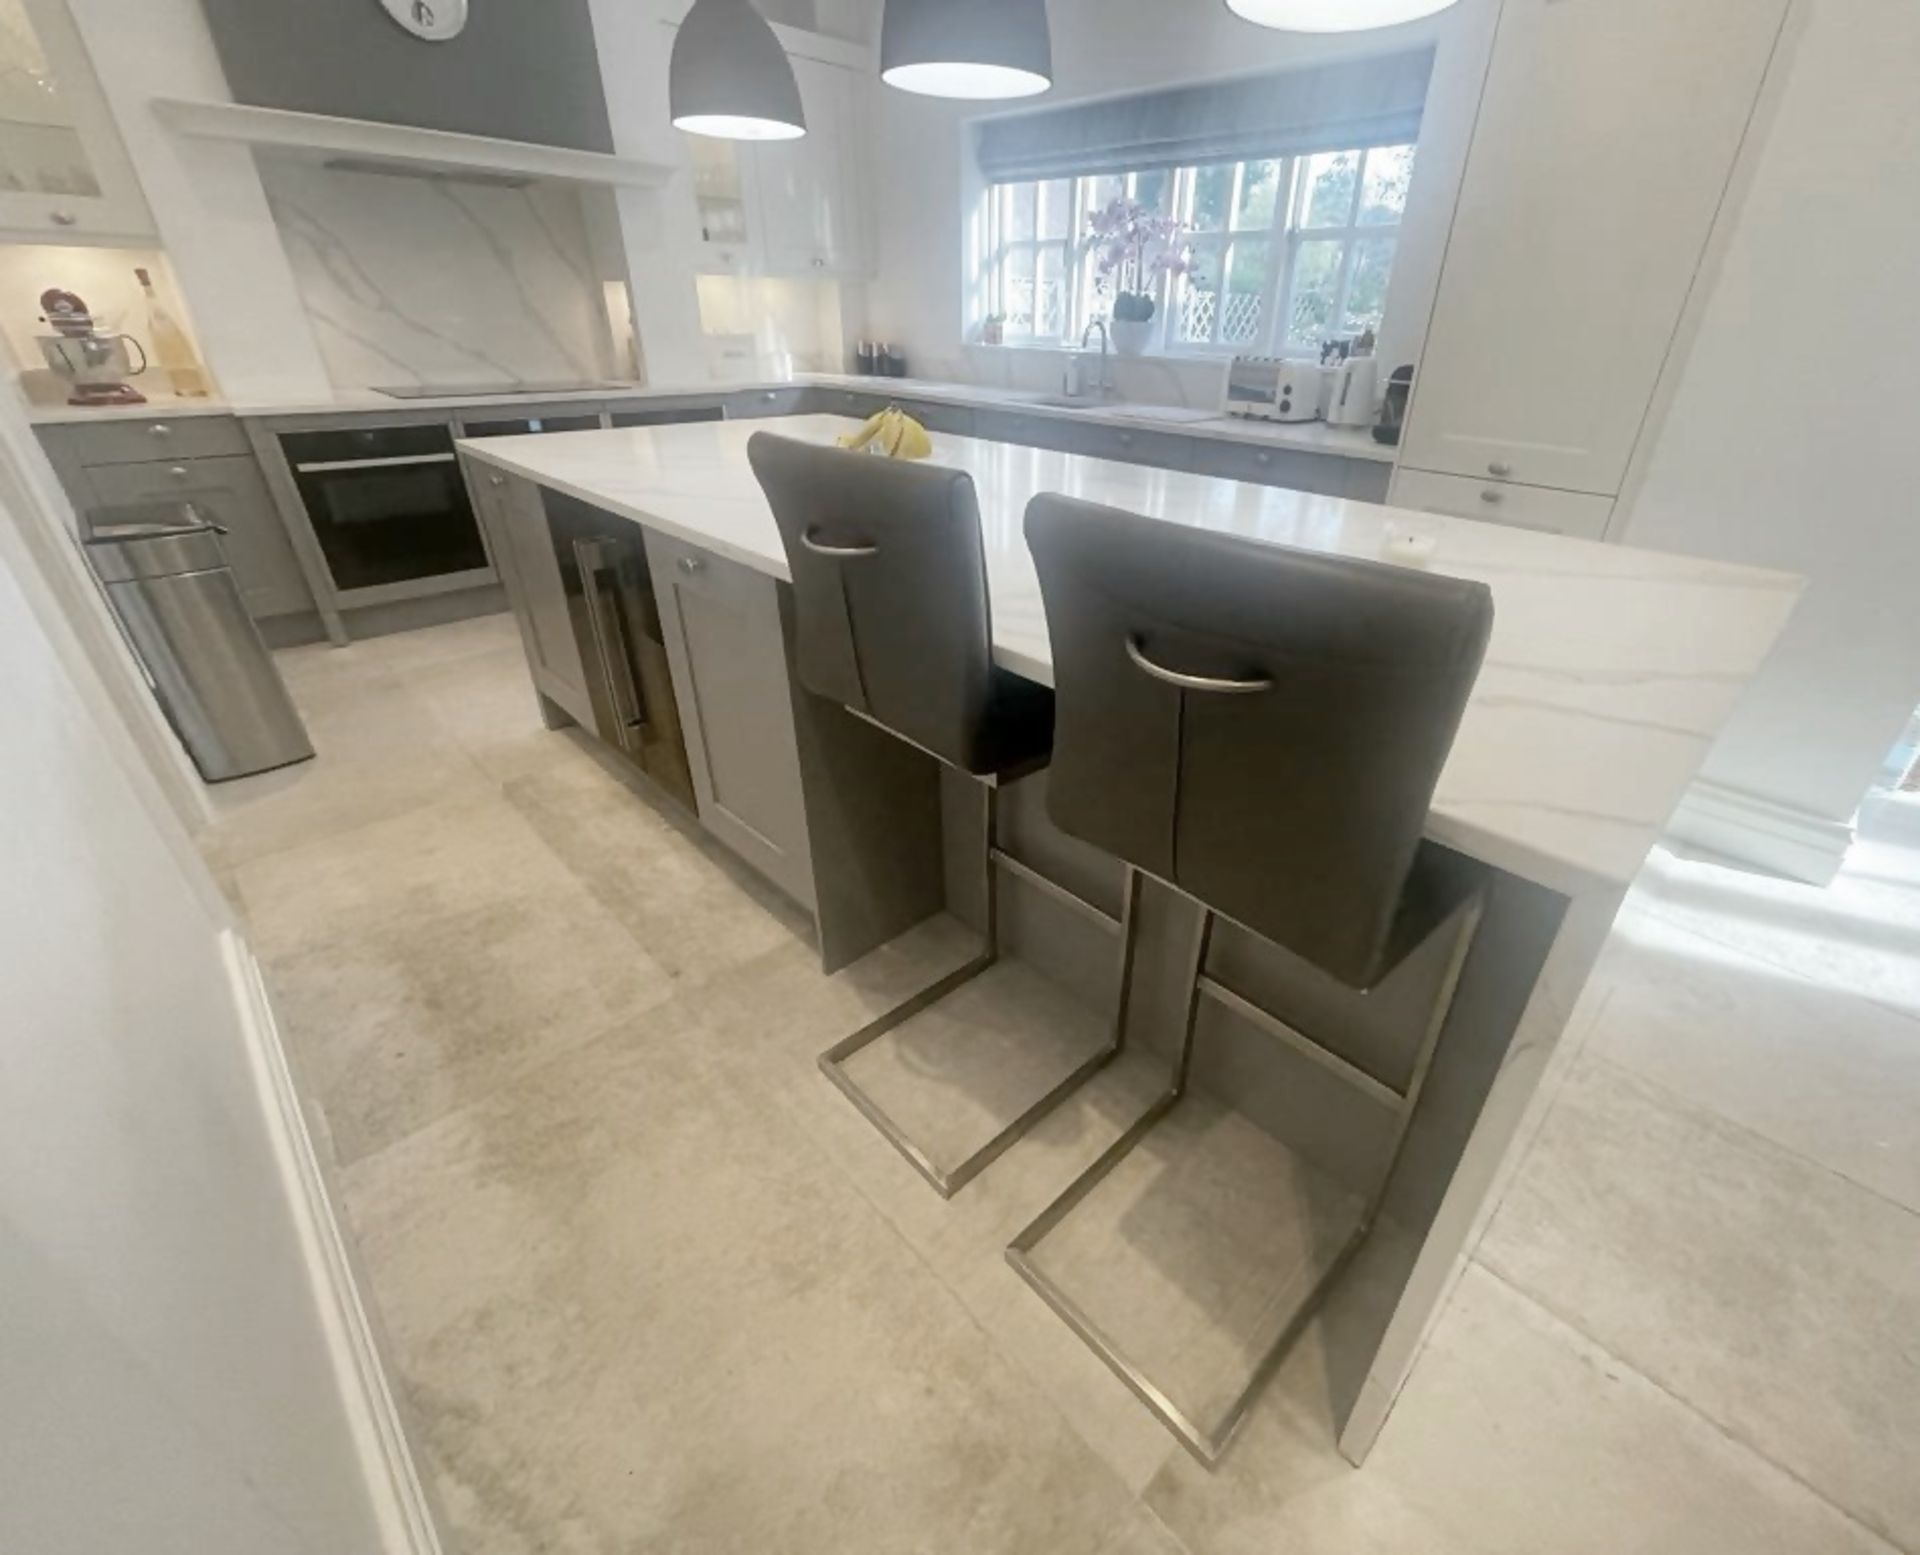 1 x SIEMATIC Bespoke Shaker-style Fitted Kitchen, Utility Room, Appliances & Modern Quartz Surfaces - Image 60 of 99